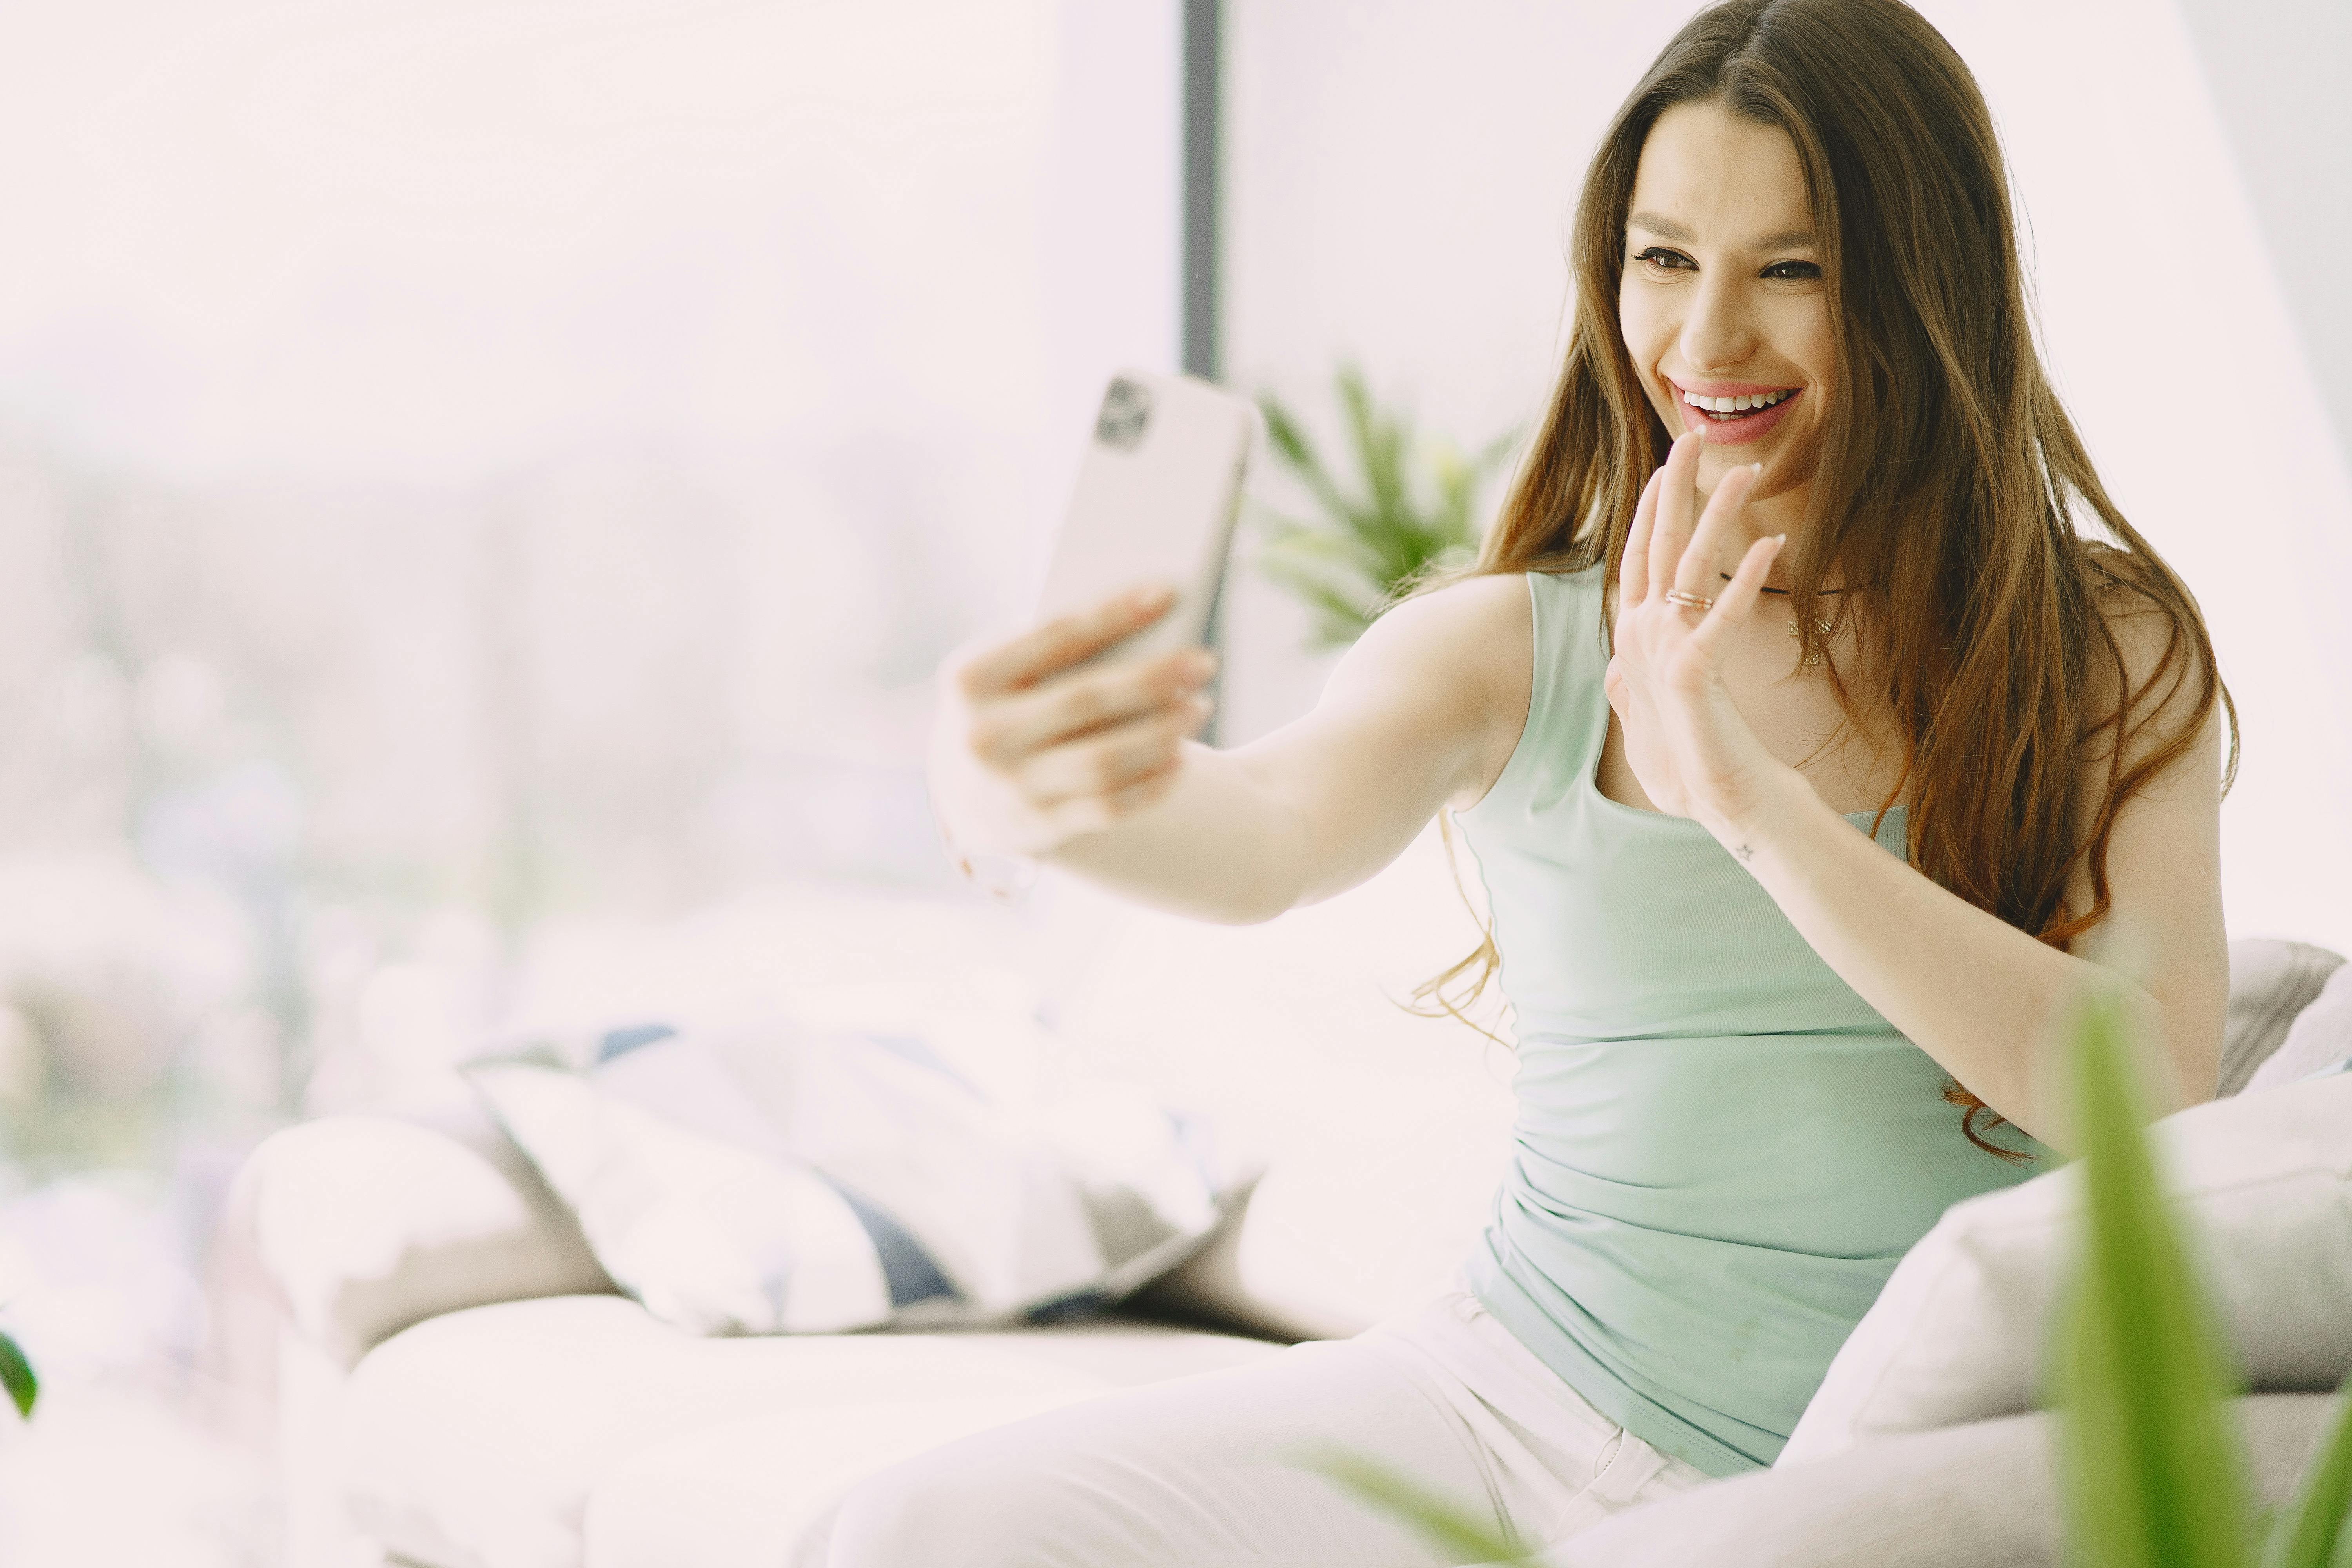 cheerful young woman using smartphone during video call